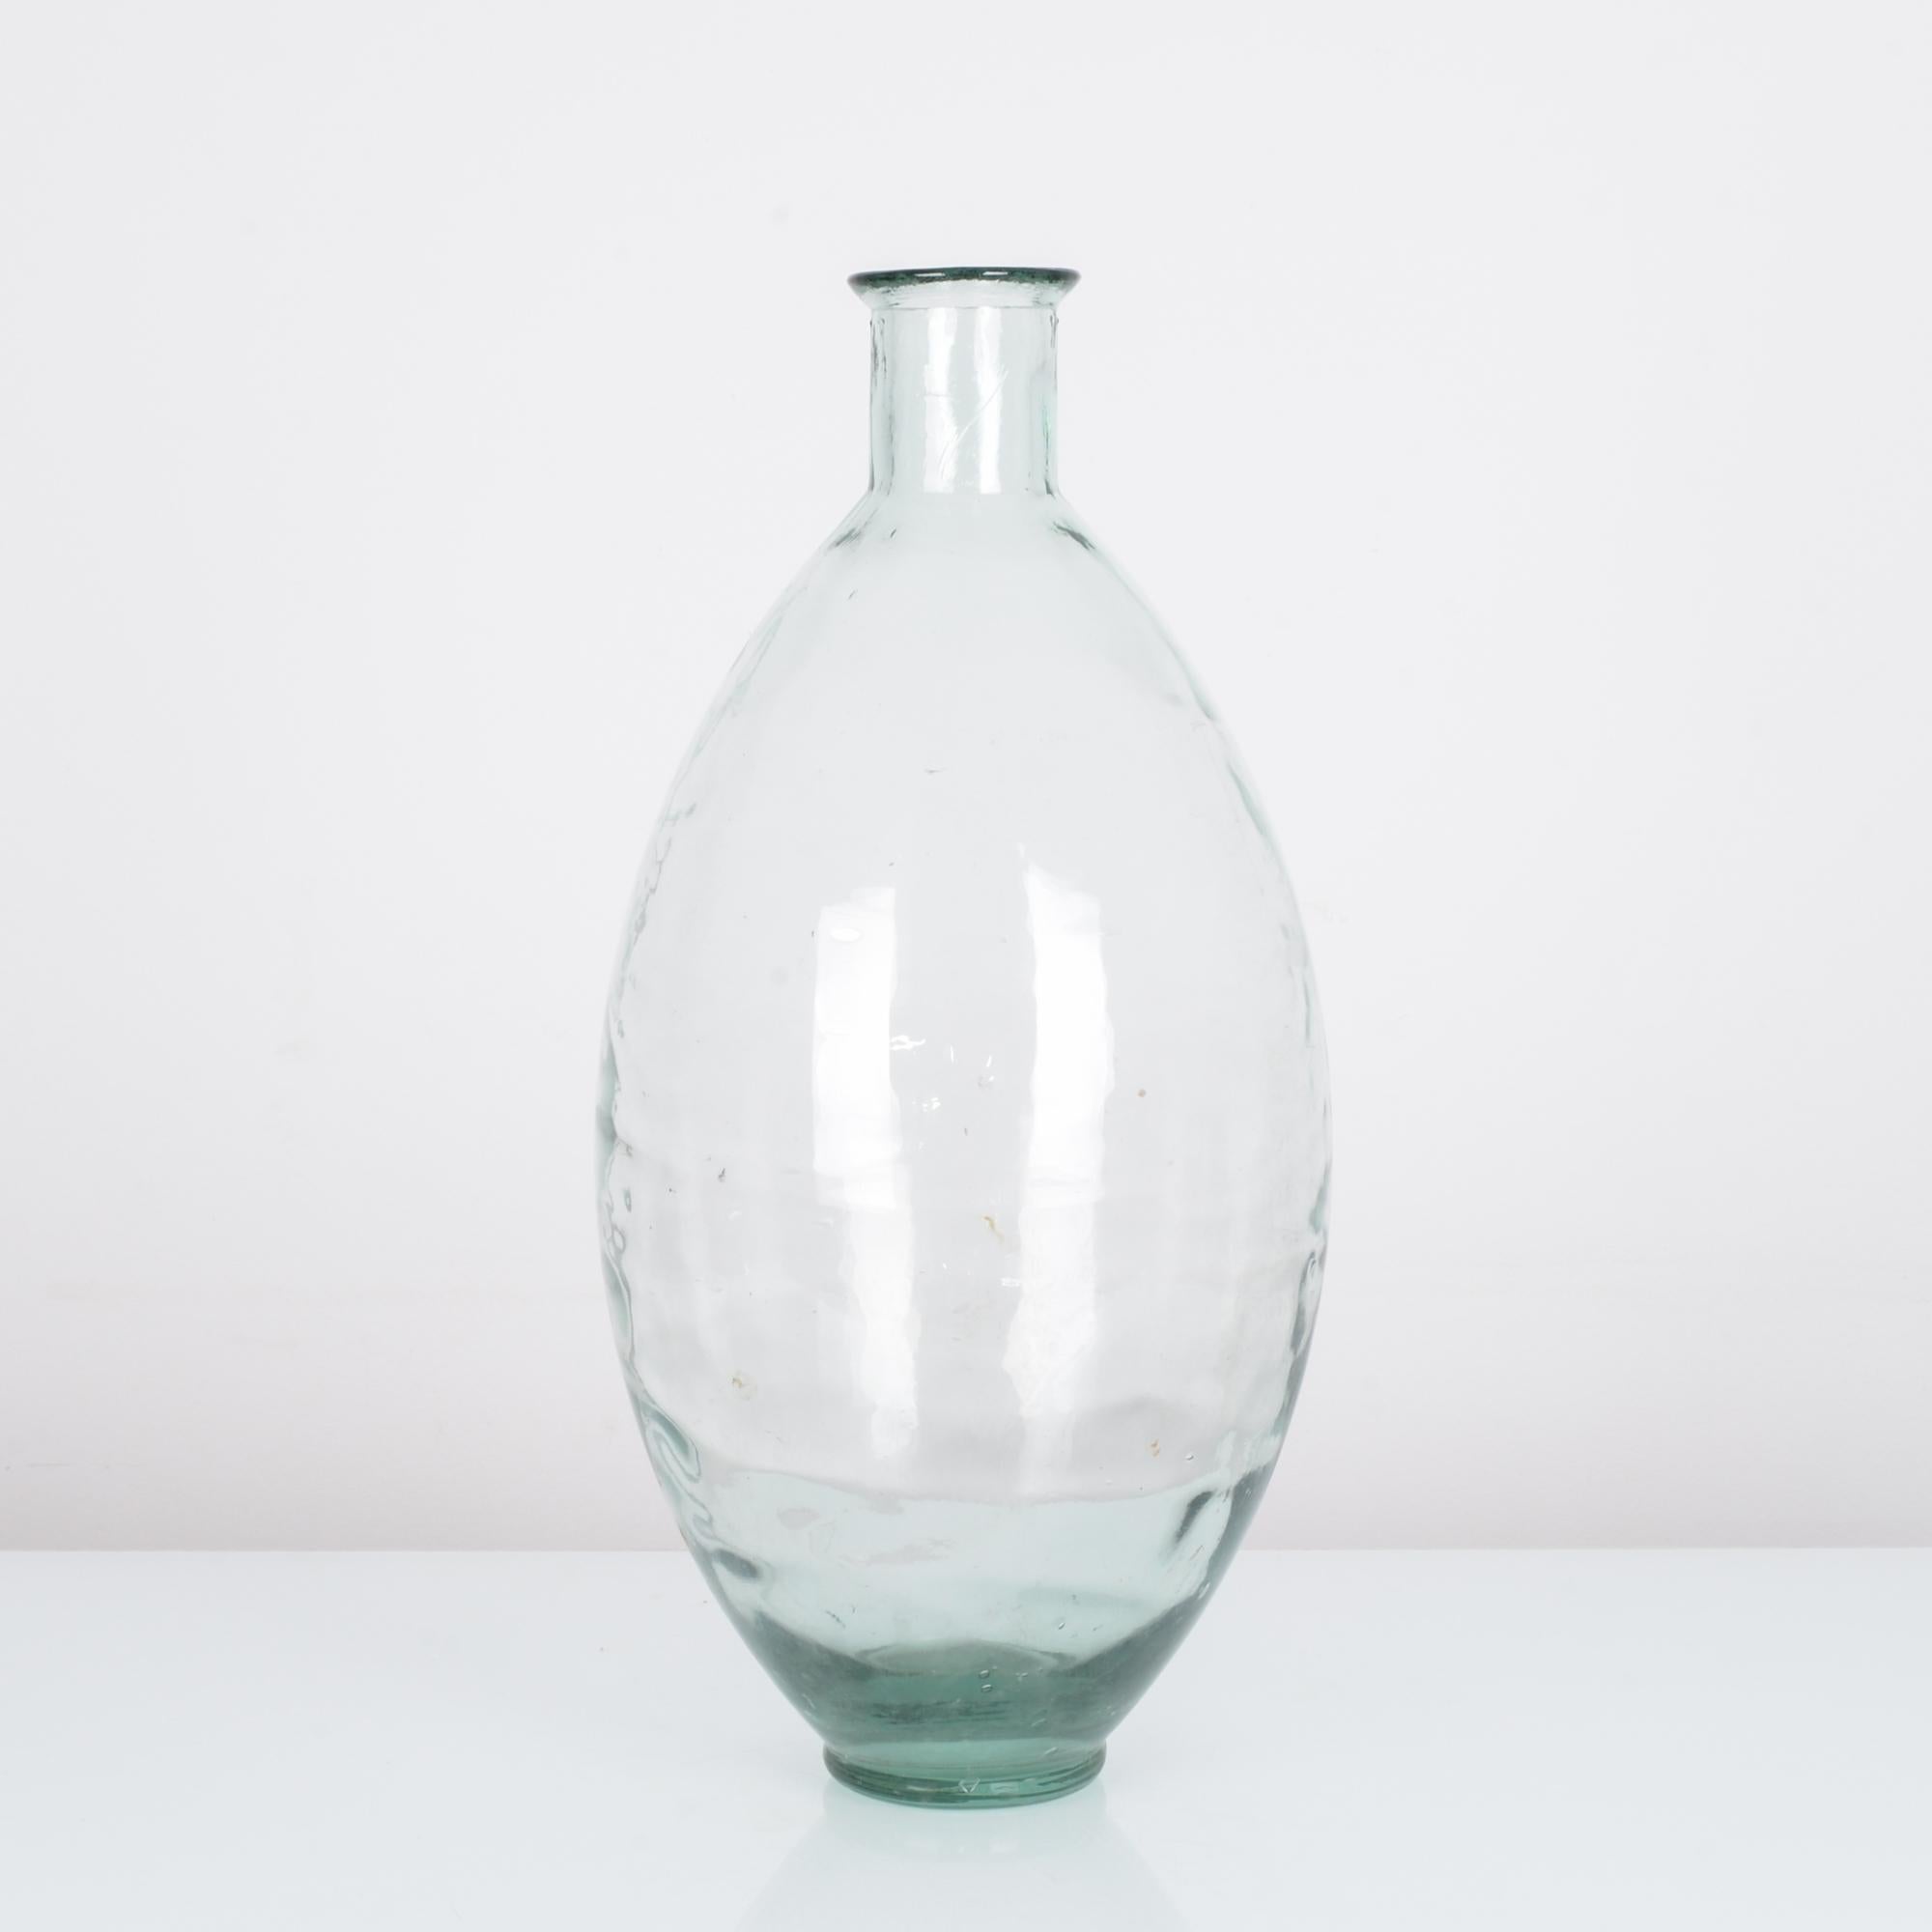 An antique 60 cm clear glass vase produced in France circa 1900. Lucid lines create an ovoid shape, evoking balance and manifesting the early cries of Modernist principles. Rippling variations across the surface catch light like bulbous prisms. A